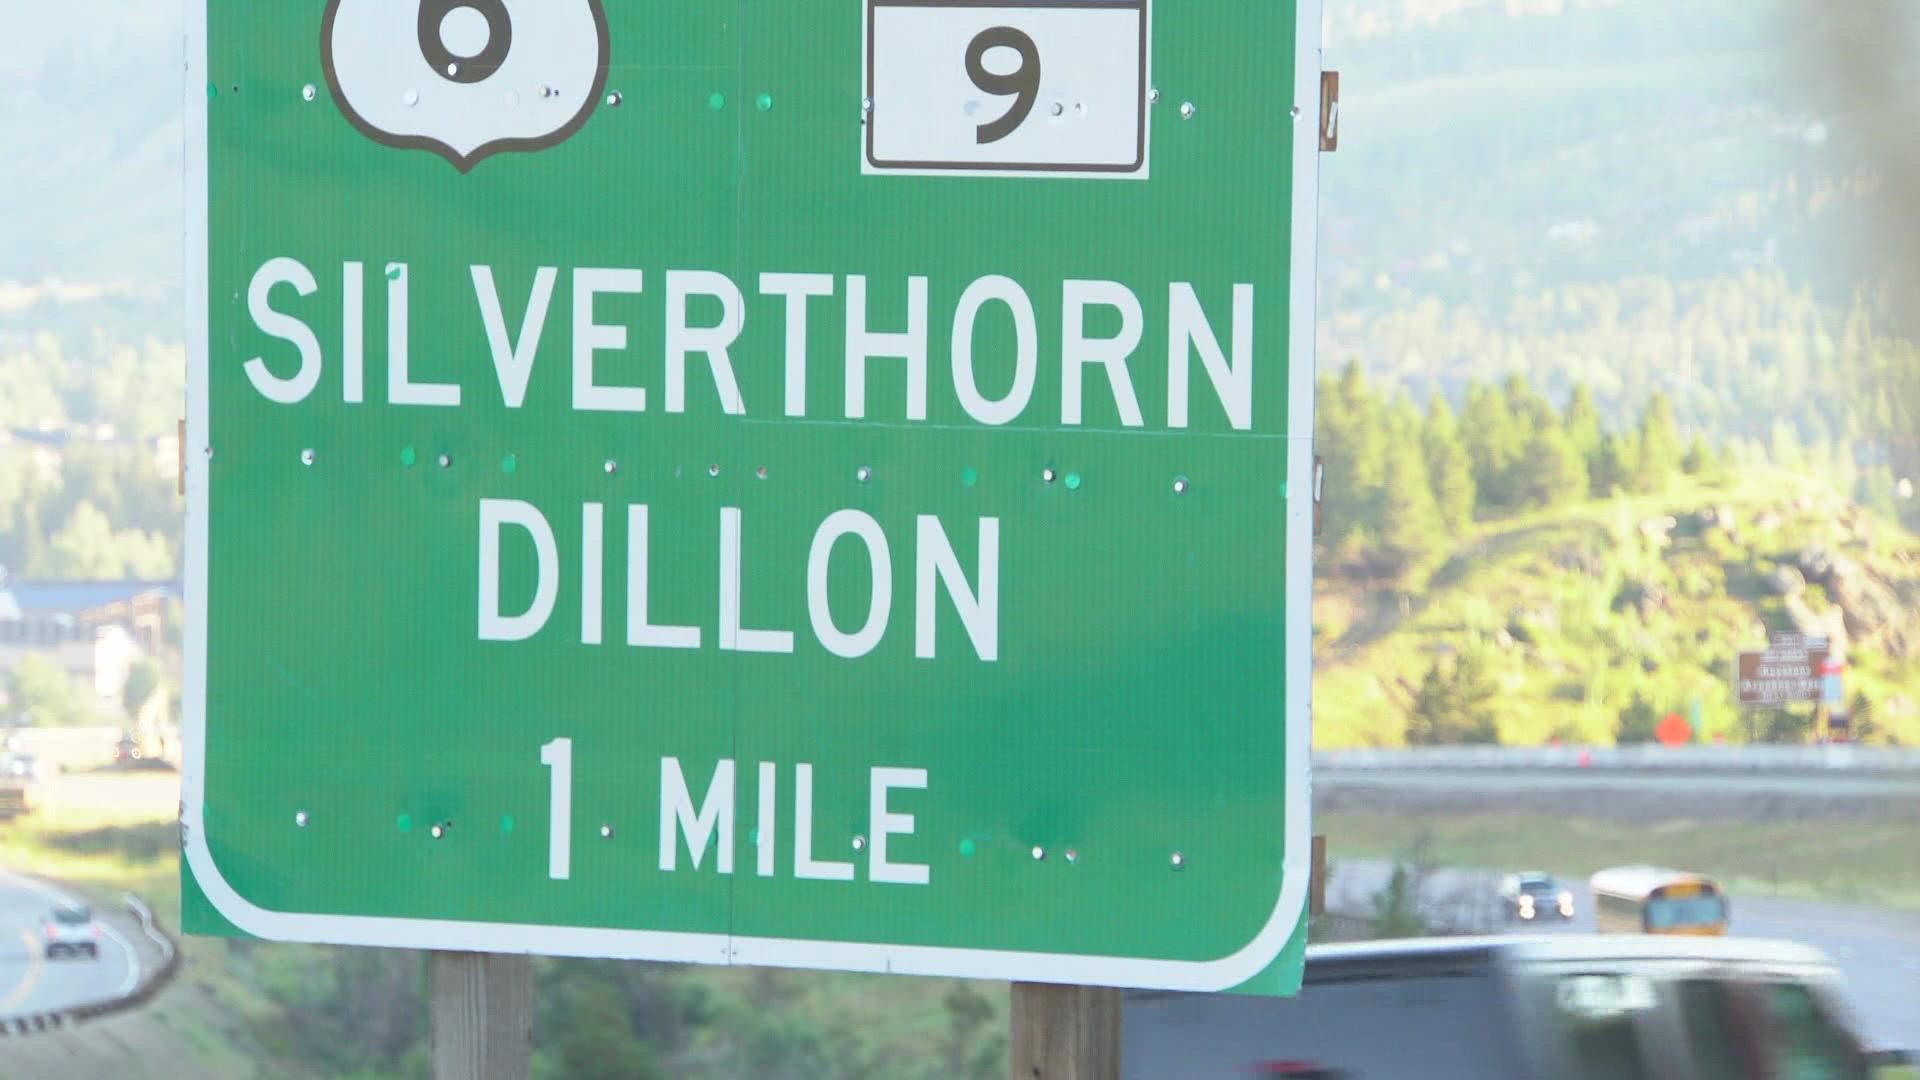 A new sign along I-70 has some people questioning the correct spelling of the town of Silverthorne.